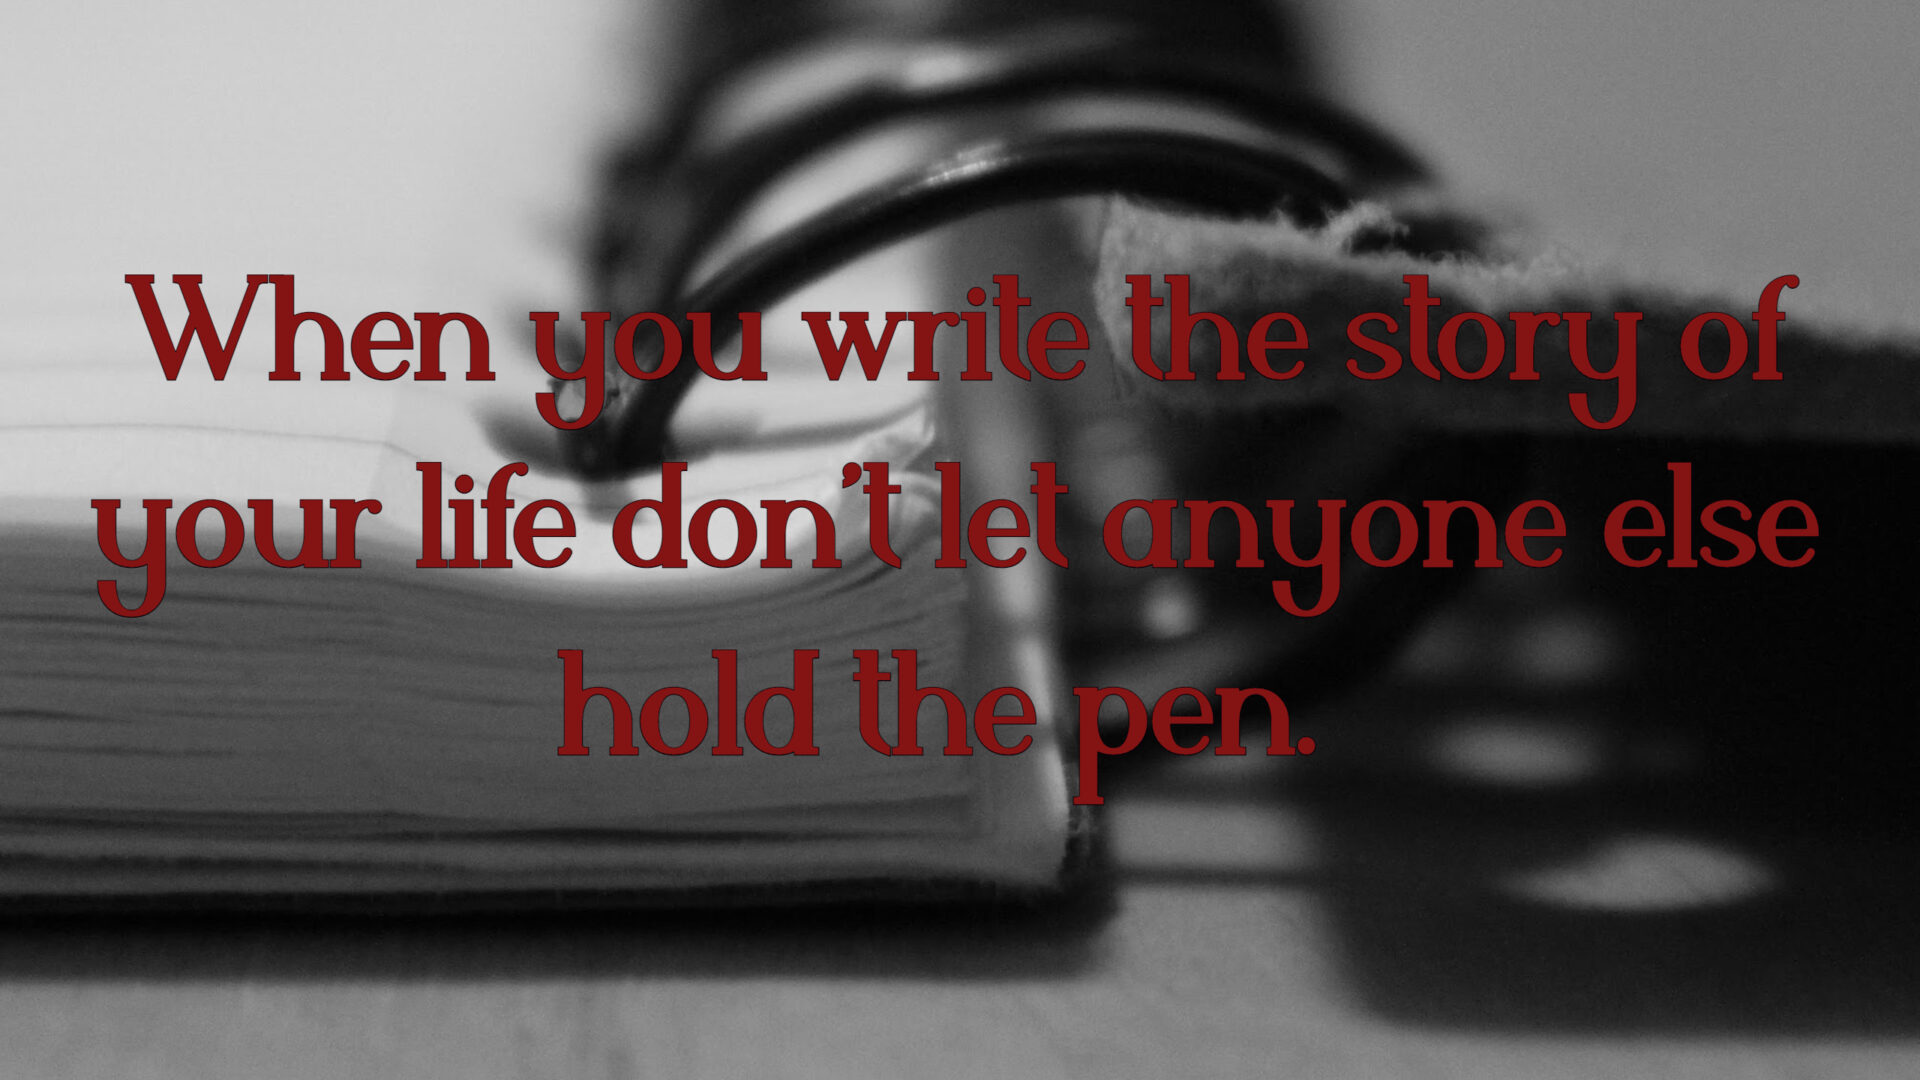 When you write the story of your life don't let anyone else hold the pen. What do you write?